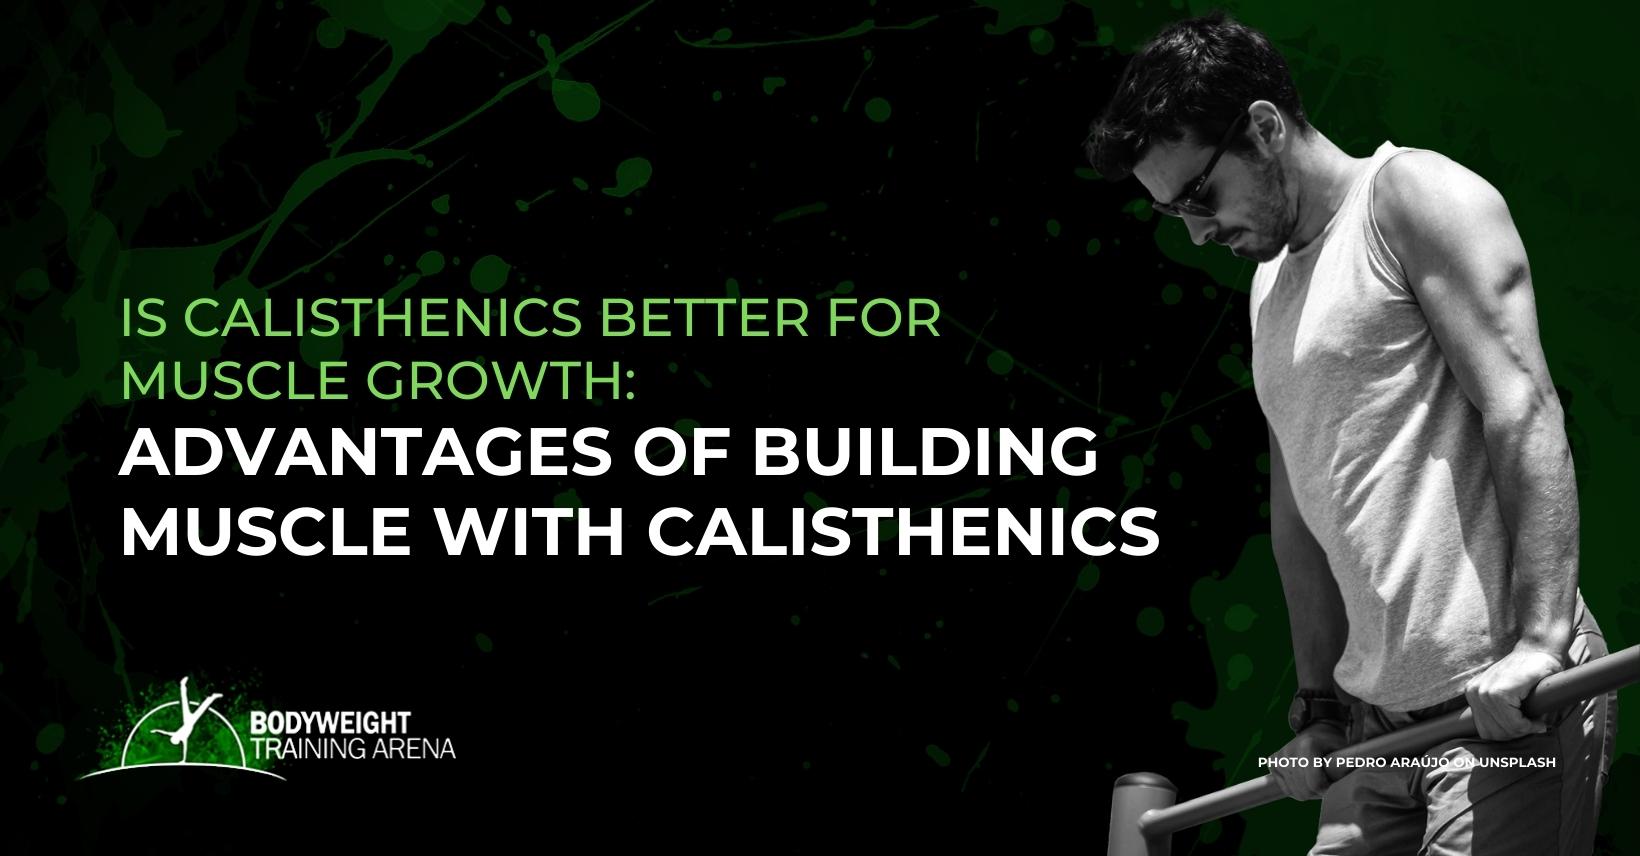 Is Calisthenics Better for Muscle Growth: Advantages of building muscle with Calisthenics